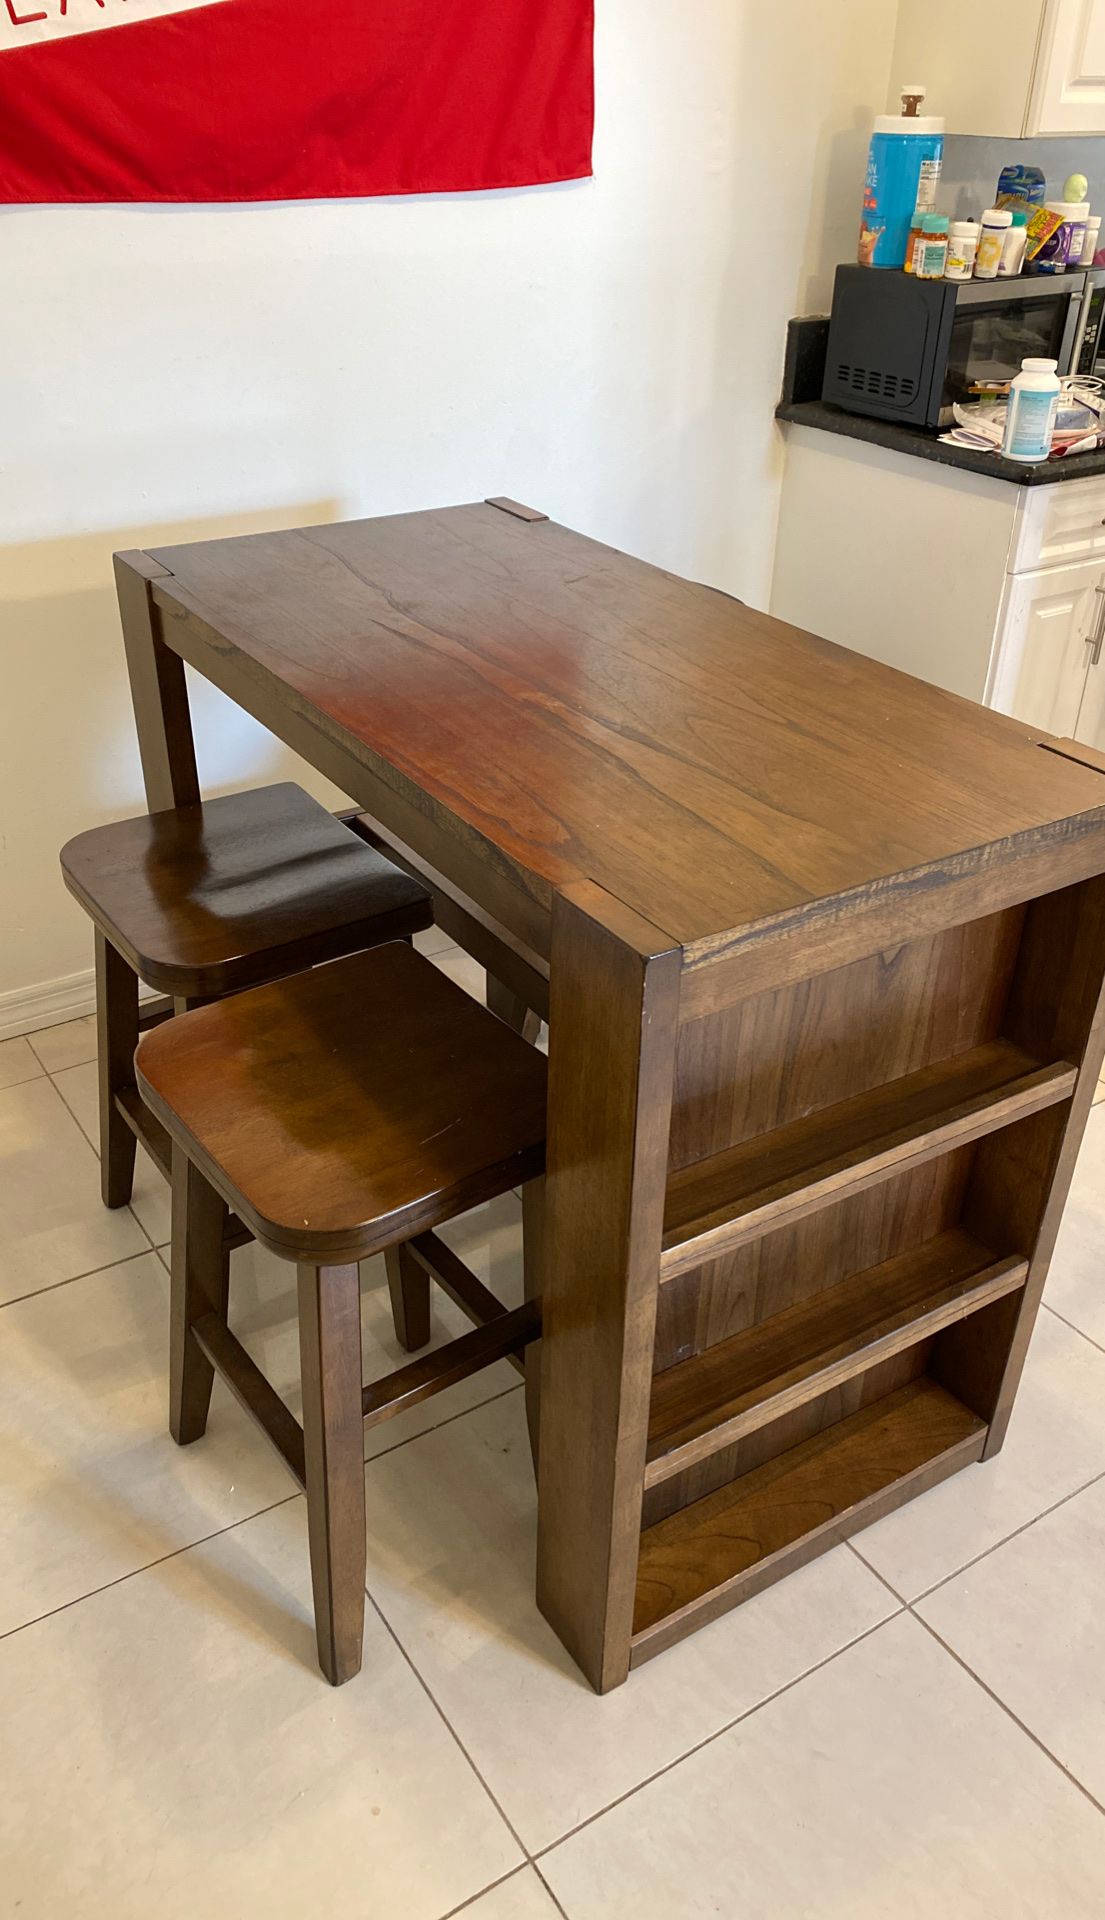 Kitchen table w/4 chairs - Ashley Furniture